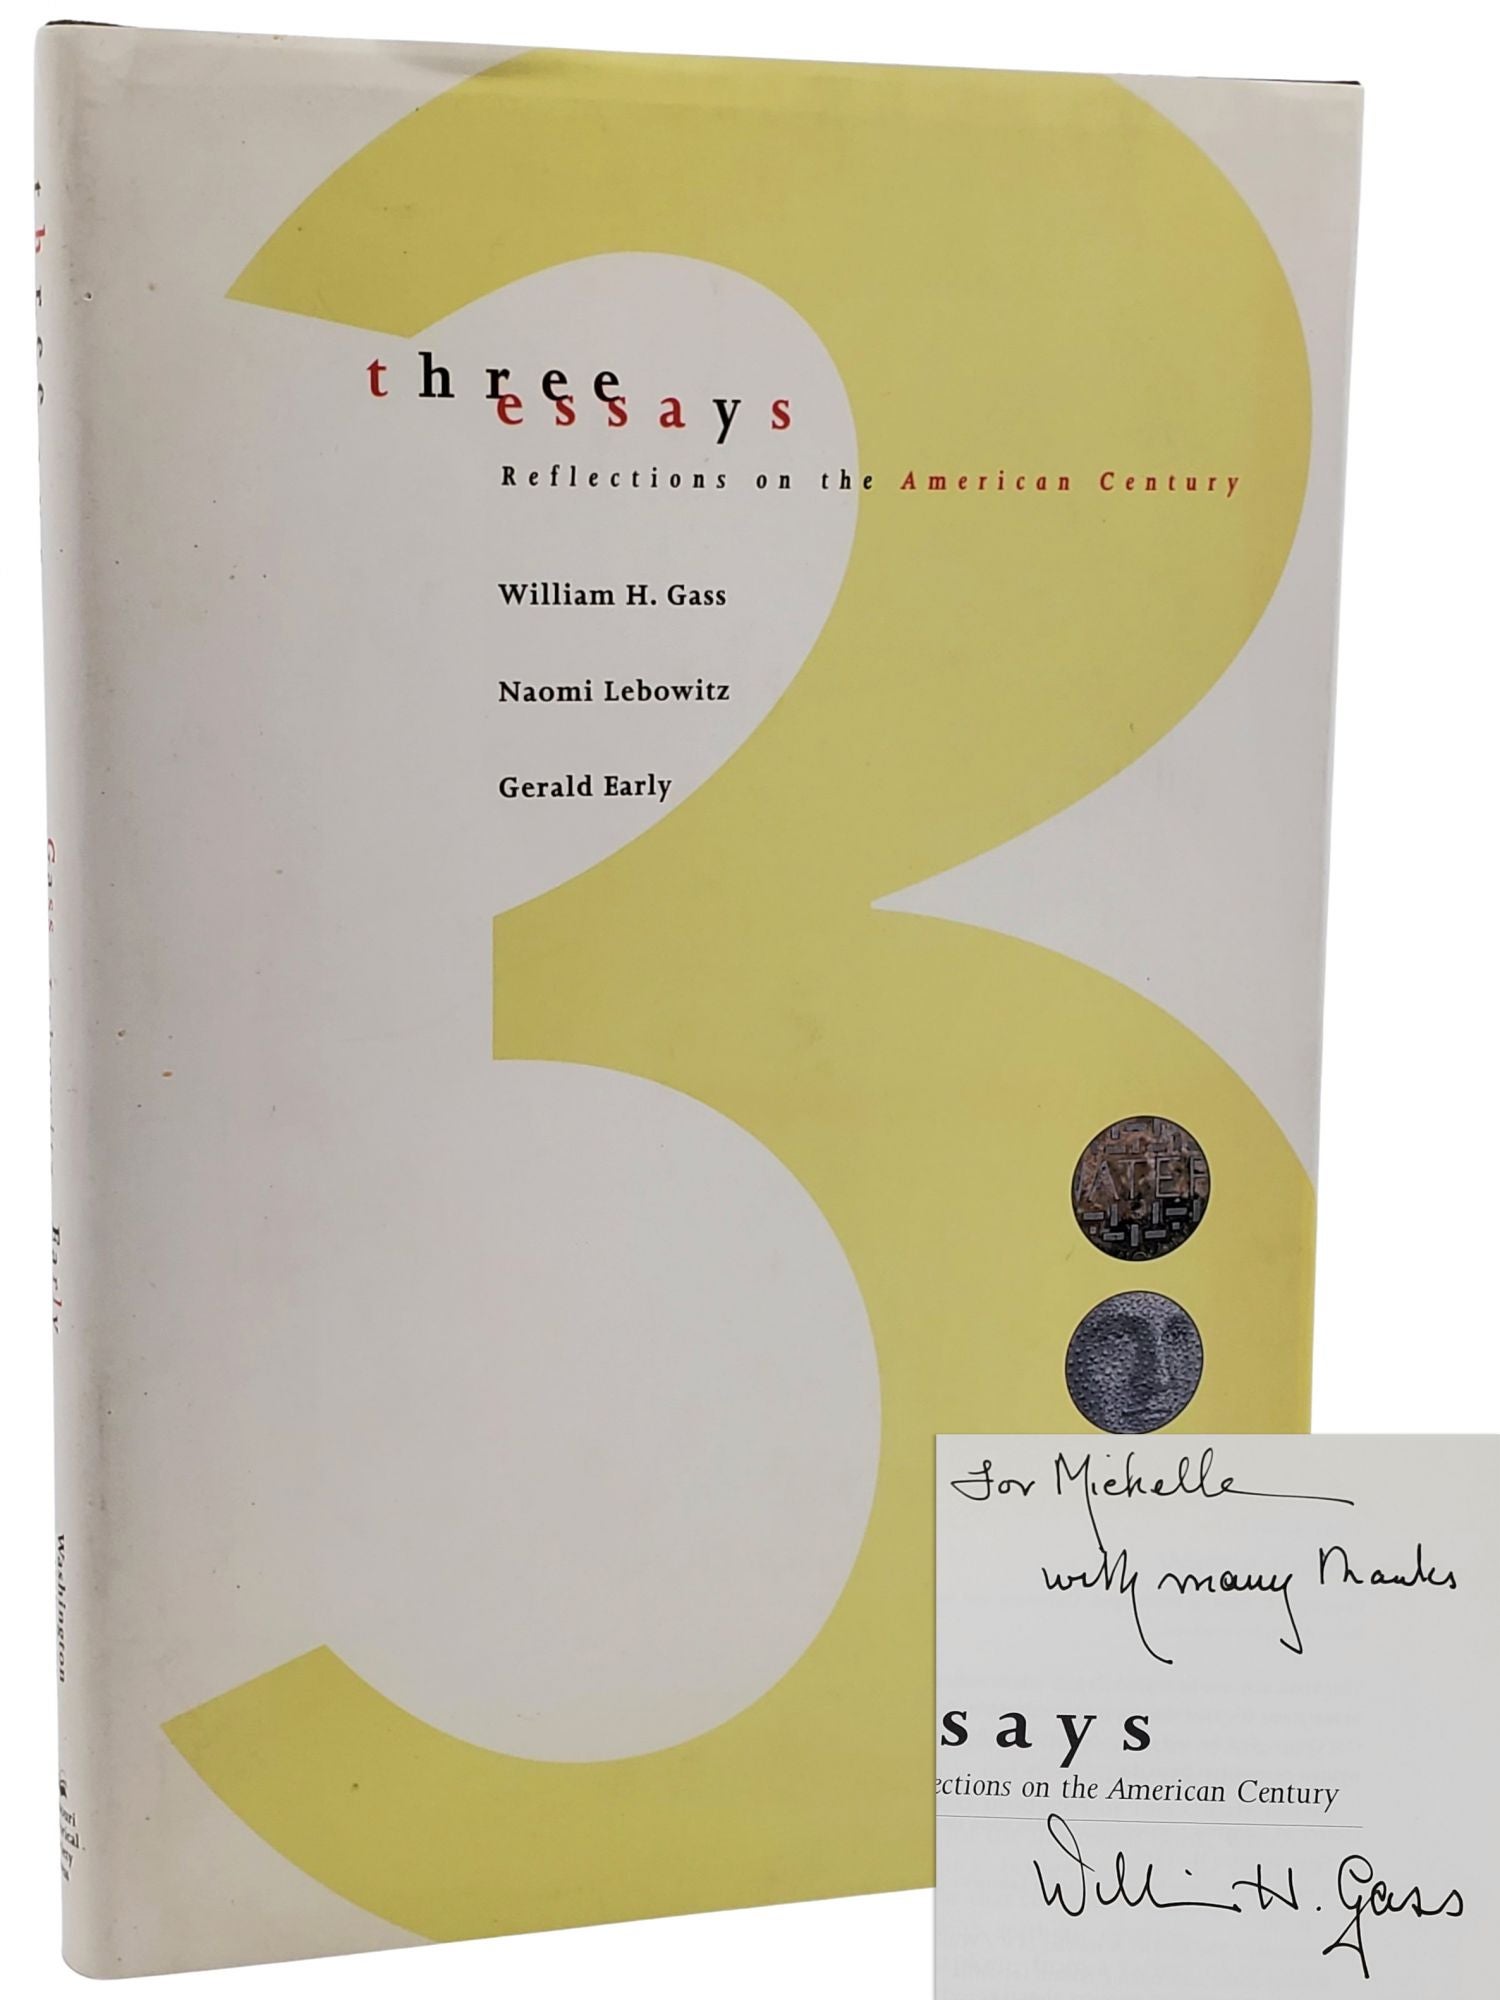 [Book #50554] THREE (3) ESSAYS: REFLECTIONS ON THE AMERICAN CENTURY (SIGNED). William H. Gass, Naomi Lebowitz, Gerald Early, Patrick Schuchard, Michael Byron, Denise Ward-Brown.